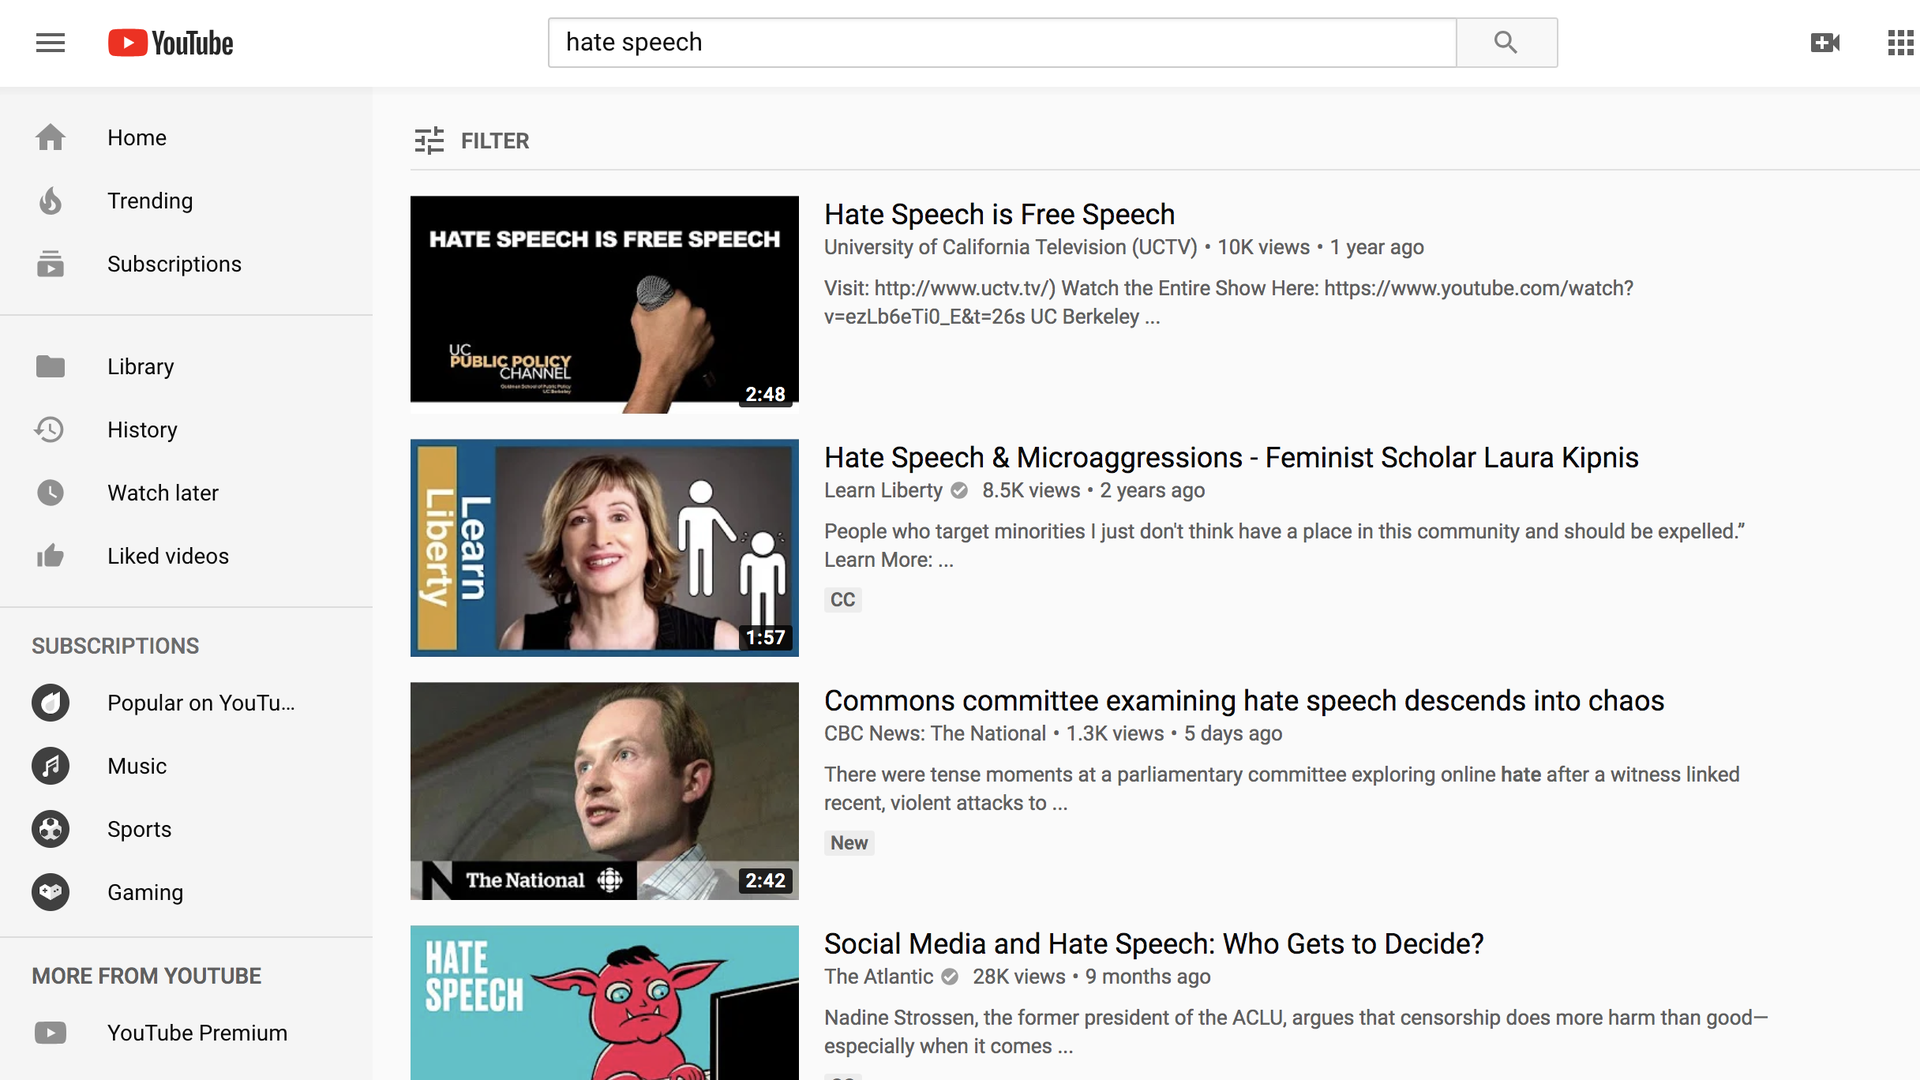 A screenshot of YouTube with "Hate Speech" in the search bar and results